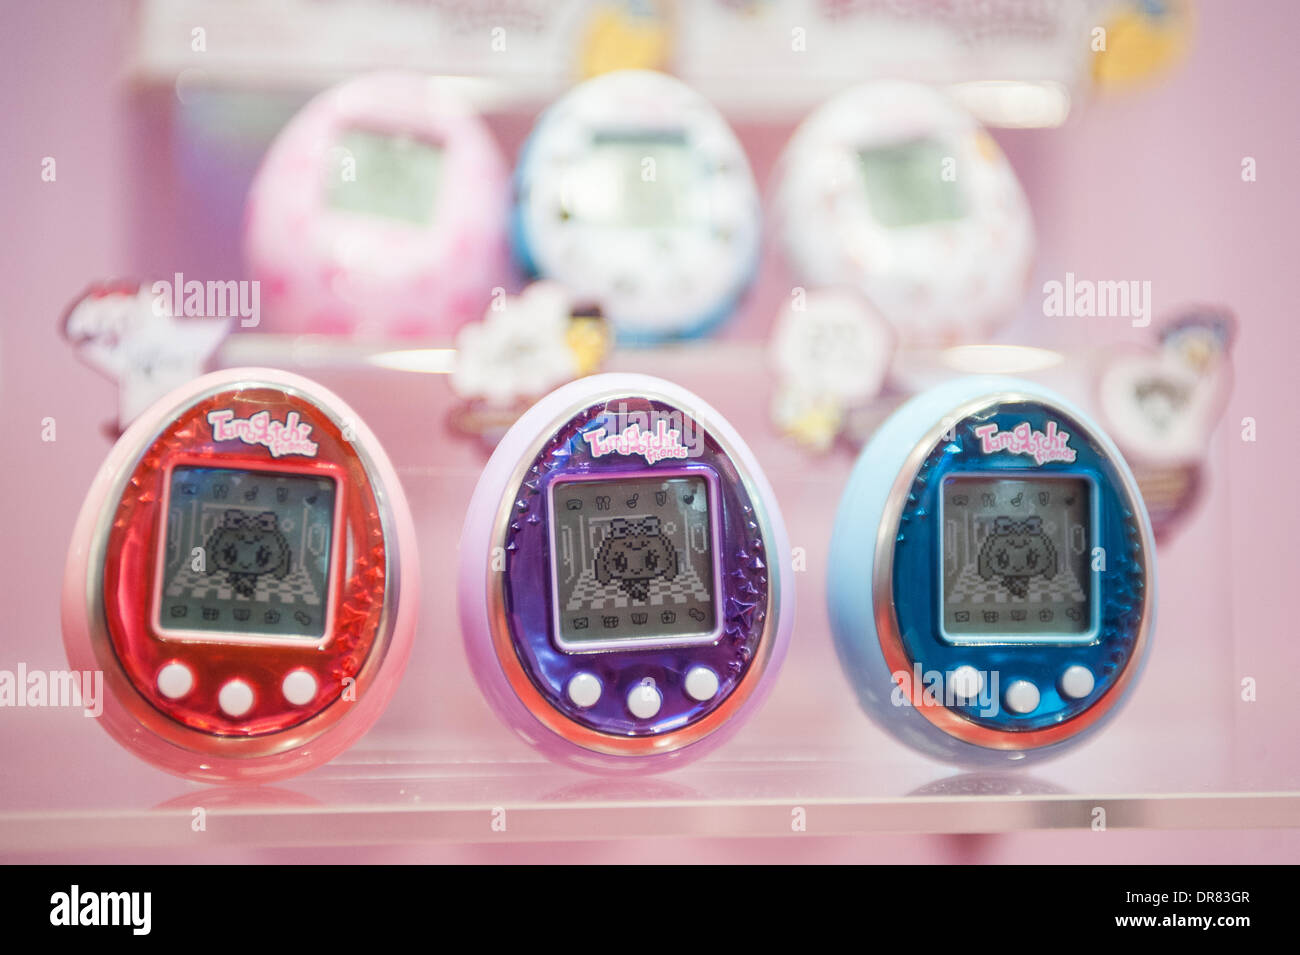 London, UK - 21 January 2014: Tamagochis by Bandai are on show at the Toy Fair 2014 at Kensington Olympia. Credit:  Piero Cruciatti/Alamy Live News Stock Photo